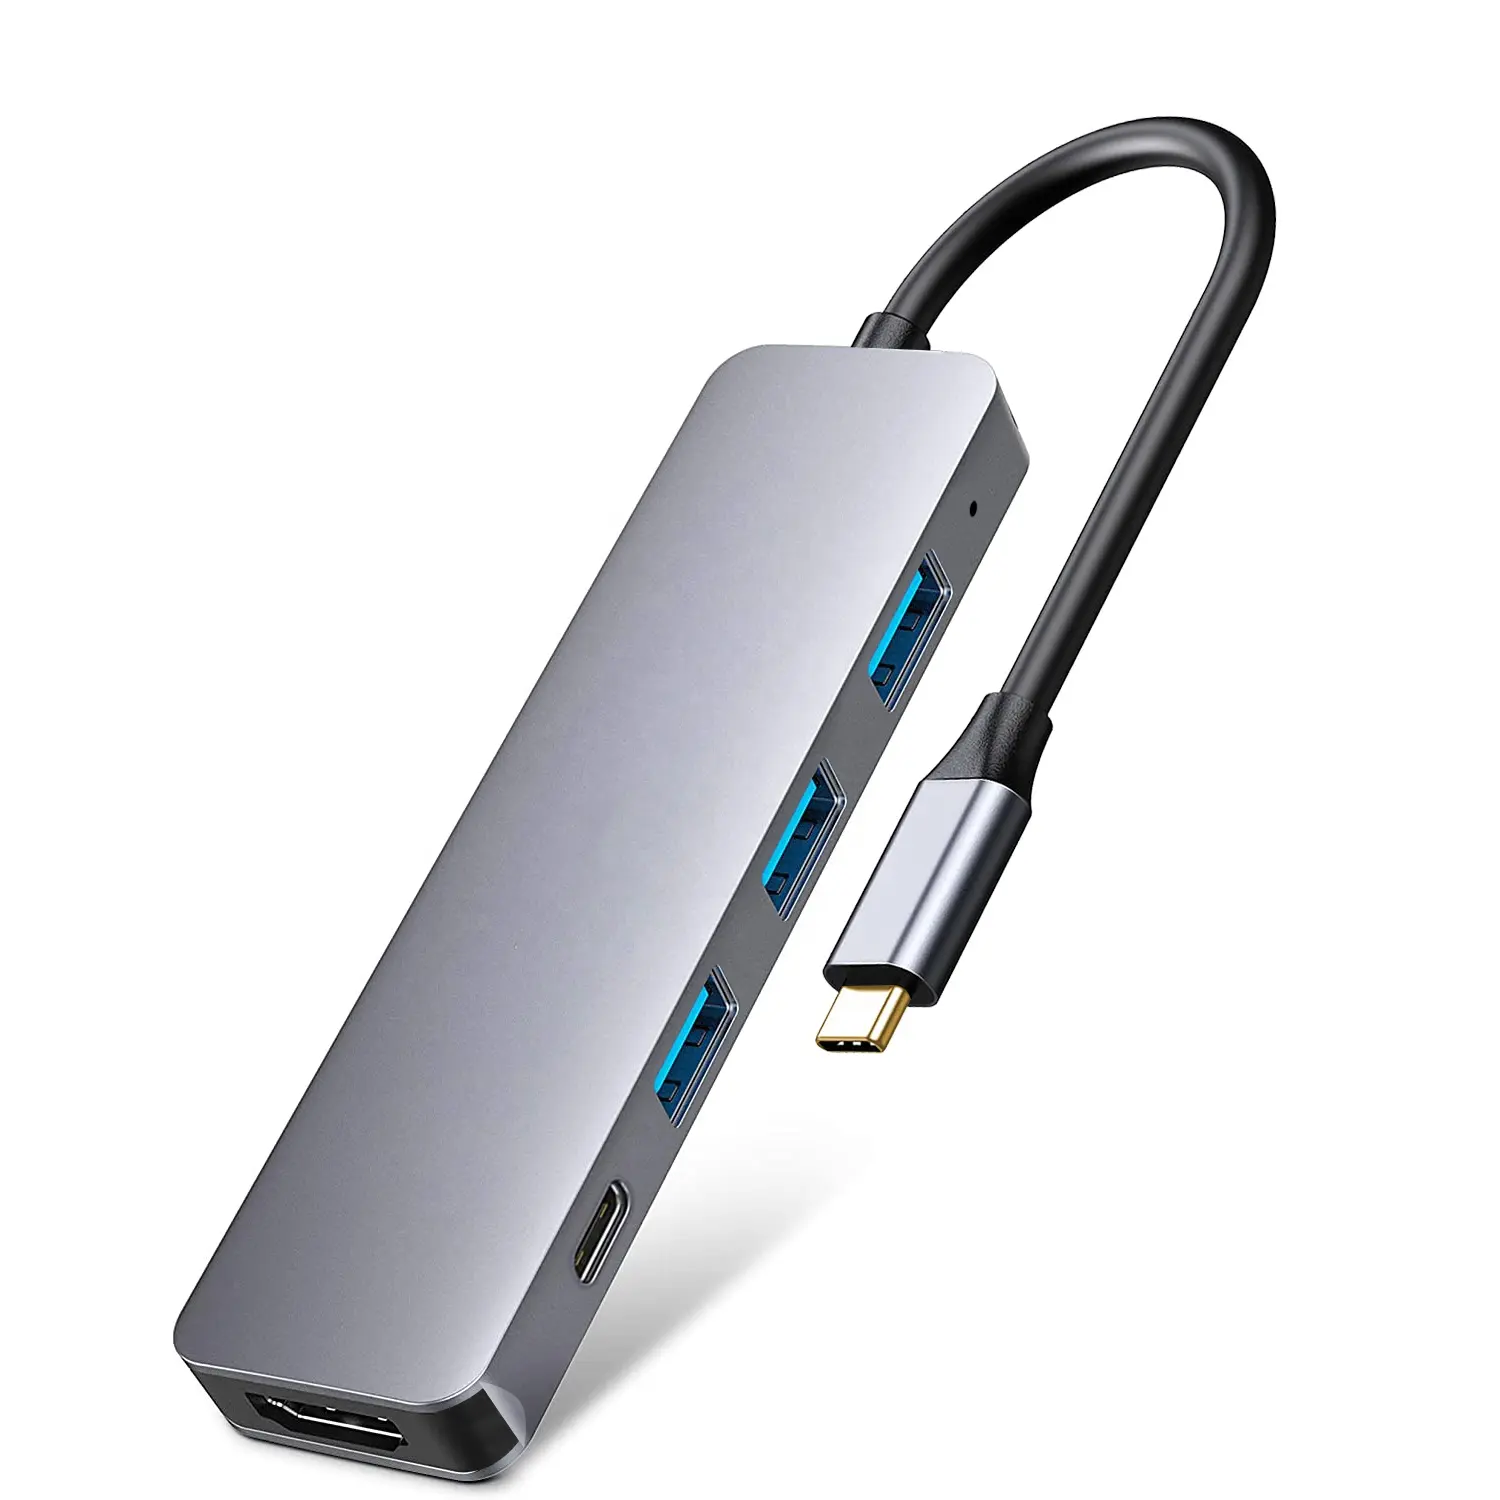 5 in 1 USB-C Thunderbolt 3 Hub to 4K HDMI Adapter USB 3.0 Port  100W PD Compatible with Mac Book Pro Air